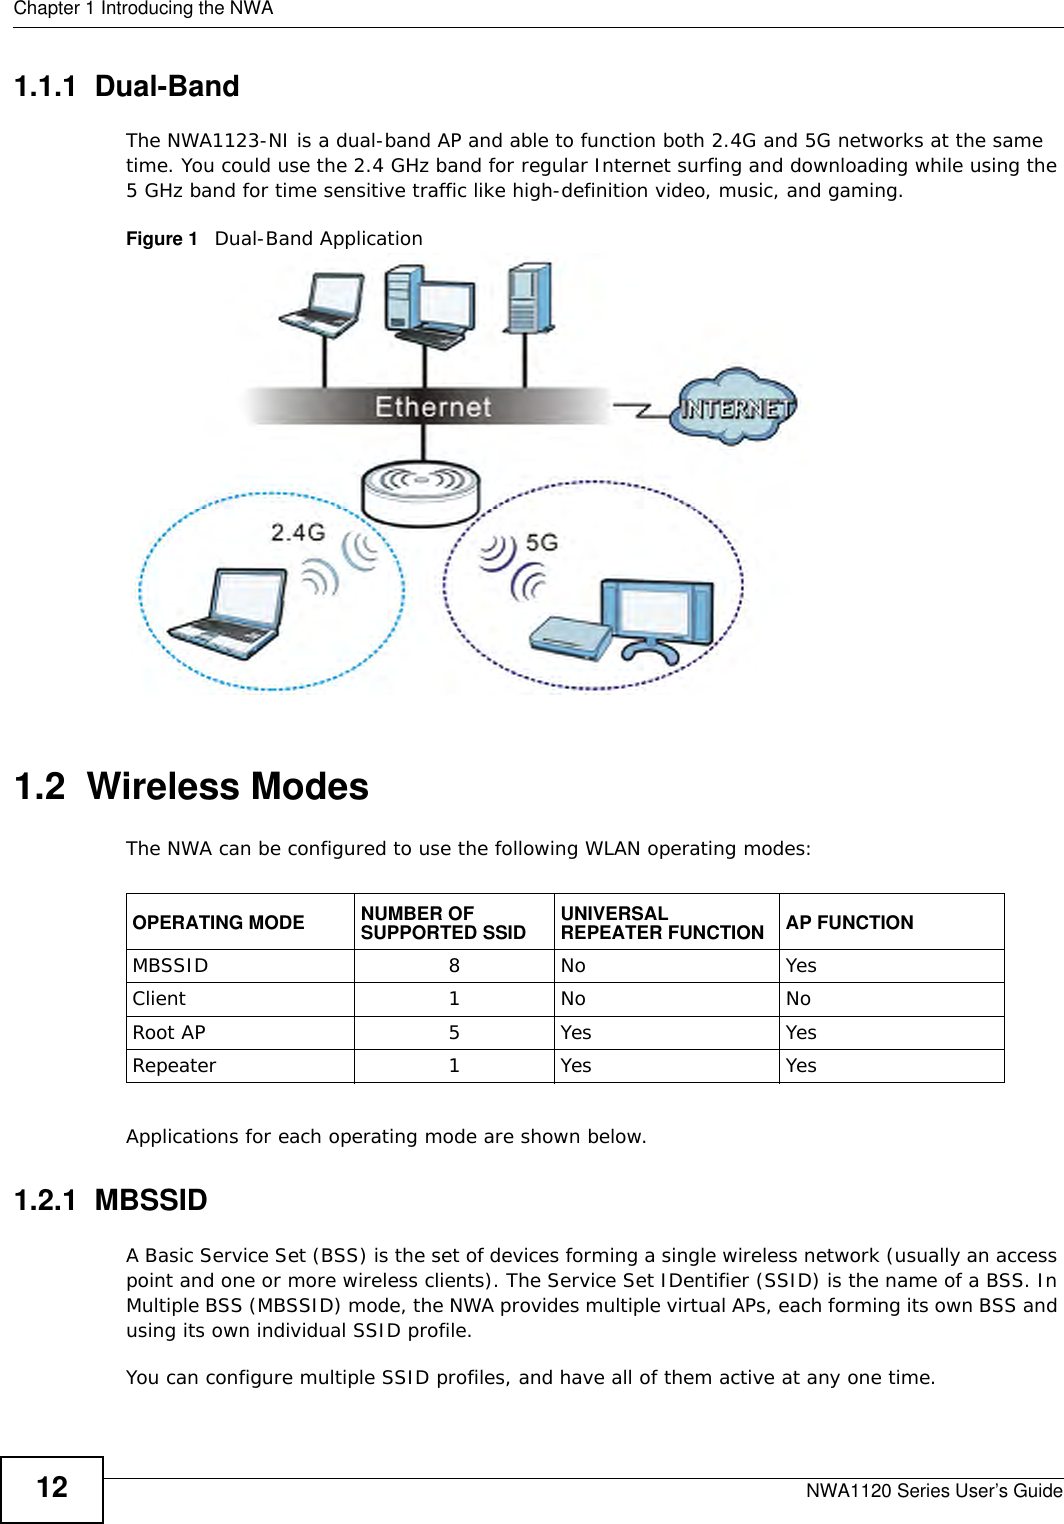 Chapter 1 Introducing the NWANWA1120 Series User’s Guide121.1.1  Dual-BandThe NWA1123-NI is a dual-band AP and able to function both 2.4G and 5G networks at the same time. You could use the 2.4 GHz band for regular Internet surfing and downloading while using the 5 GHz band for time sensitive traffic like high-definition video, music, and gaming. Figure 1   Dual-Band Application 1.2  Wireless ModesThe NWA can be configured to use the following WLAN operating modes:Applications for each operating mode are shown below.1.2.1  MBSSIDA Basic Service Set (BSS) is the set of devices forming a single wireless network (usually an access point and one or more wireless clients). The Service Set IDentifier (SSID) is the name of a BSS. In Multiple BSS (MBSSID) mode, the NWA provides multiple virtual APs, each forming its own BSS and using its own individual SSID profile.You can configure multiple SSID profiles, and have all of them active at any one time.OPERATING MODE NUMBER OF SUPPORTED SSID UNIVERSAL REPEATER FUNCTION AP FUNCTIONMBSSID 8 No YesClient 1 No NoRoot AP 5 Yes YesRepeater 1 Yes Yes